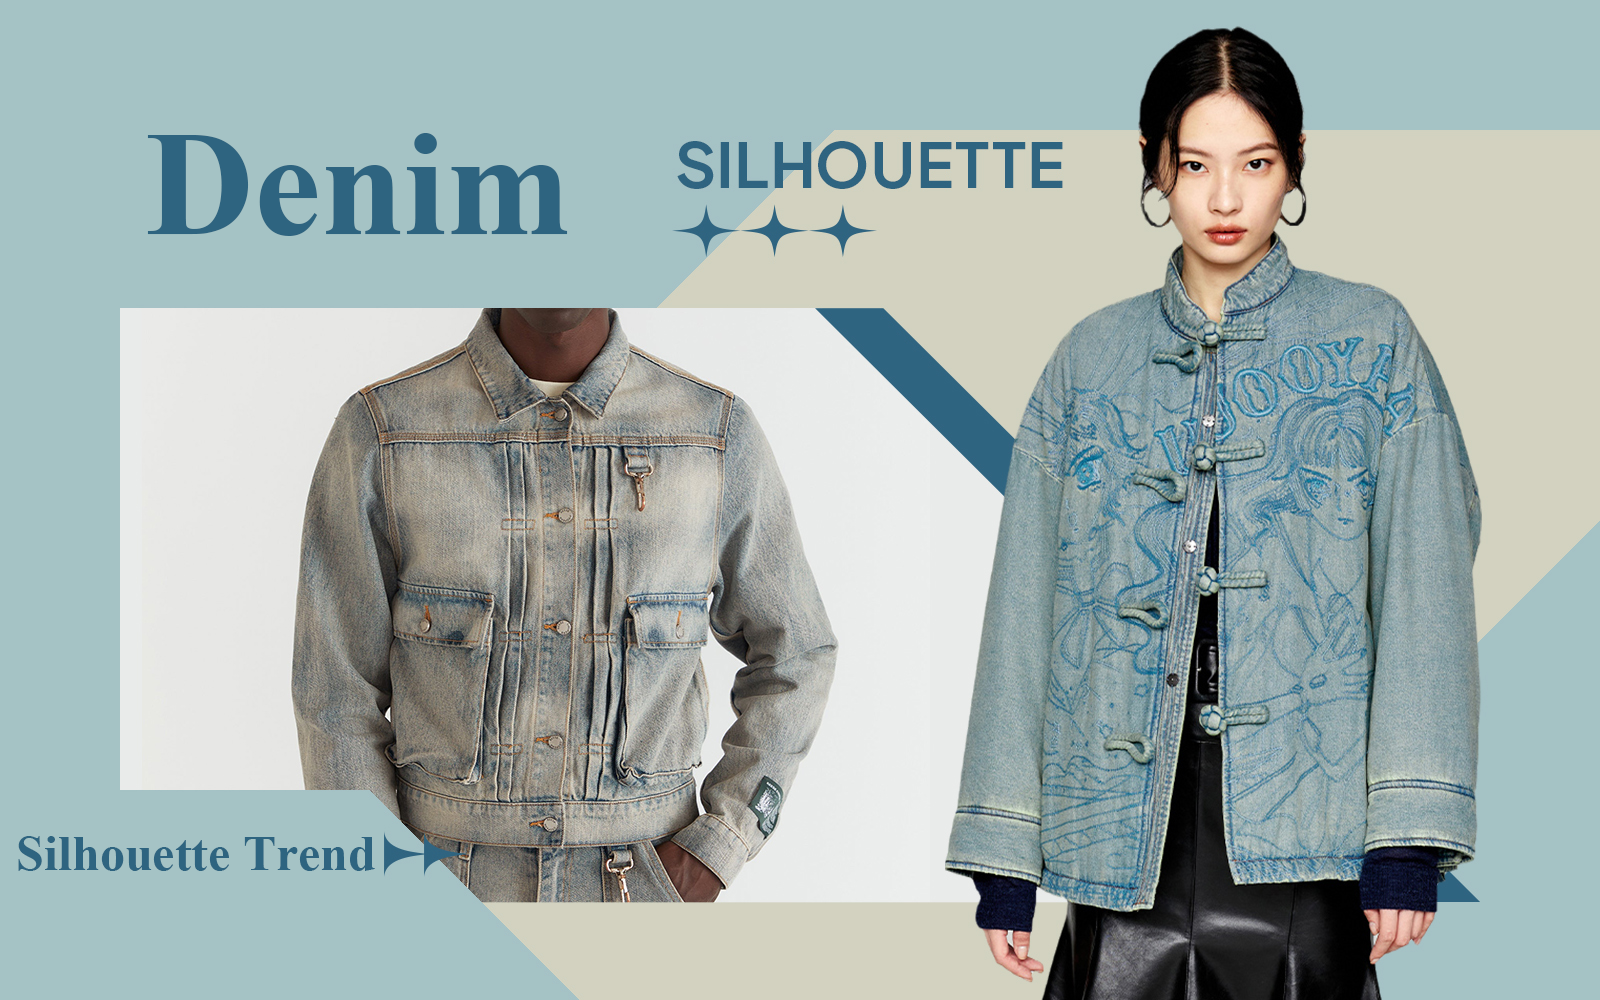 The Silhouette Trend for Denim Jacket